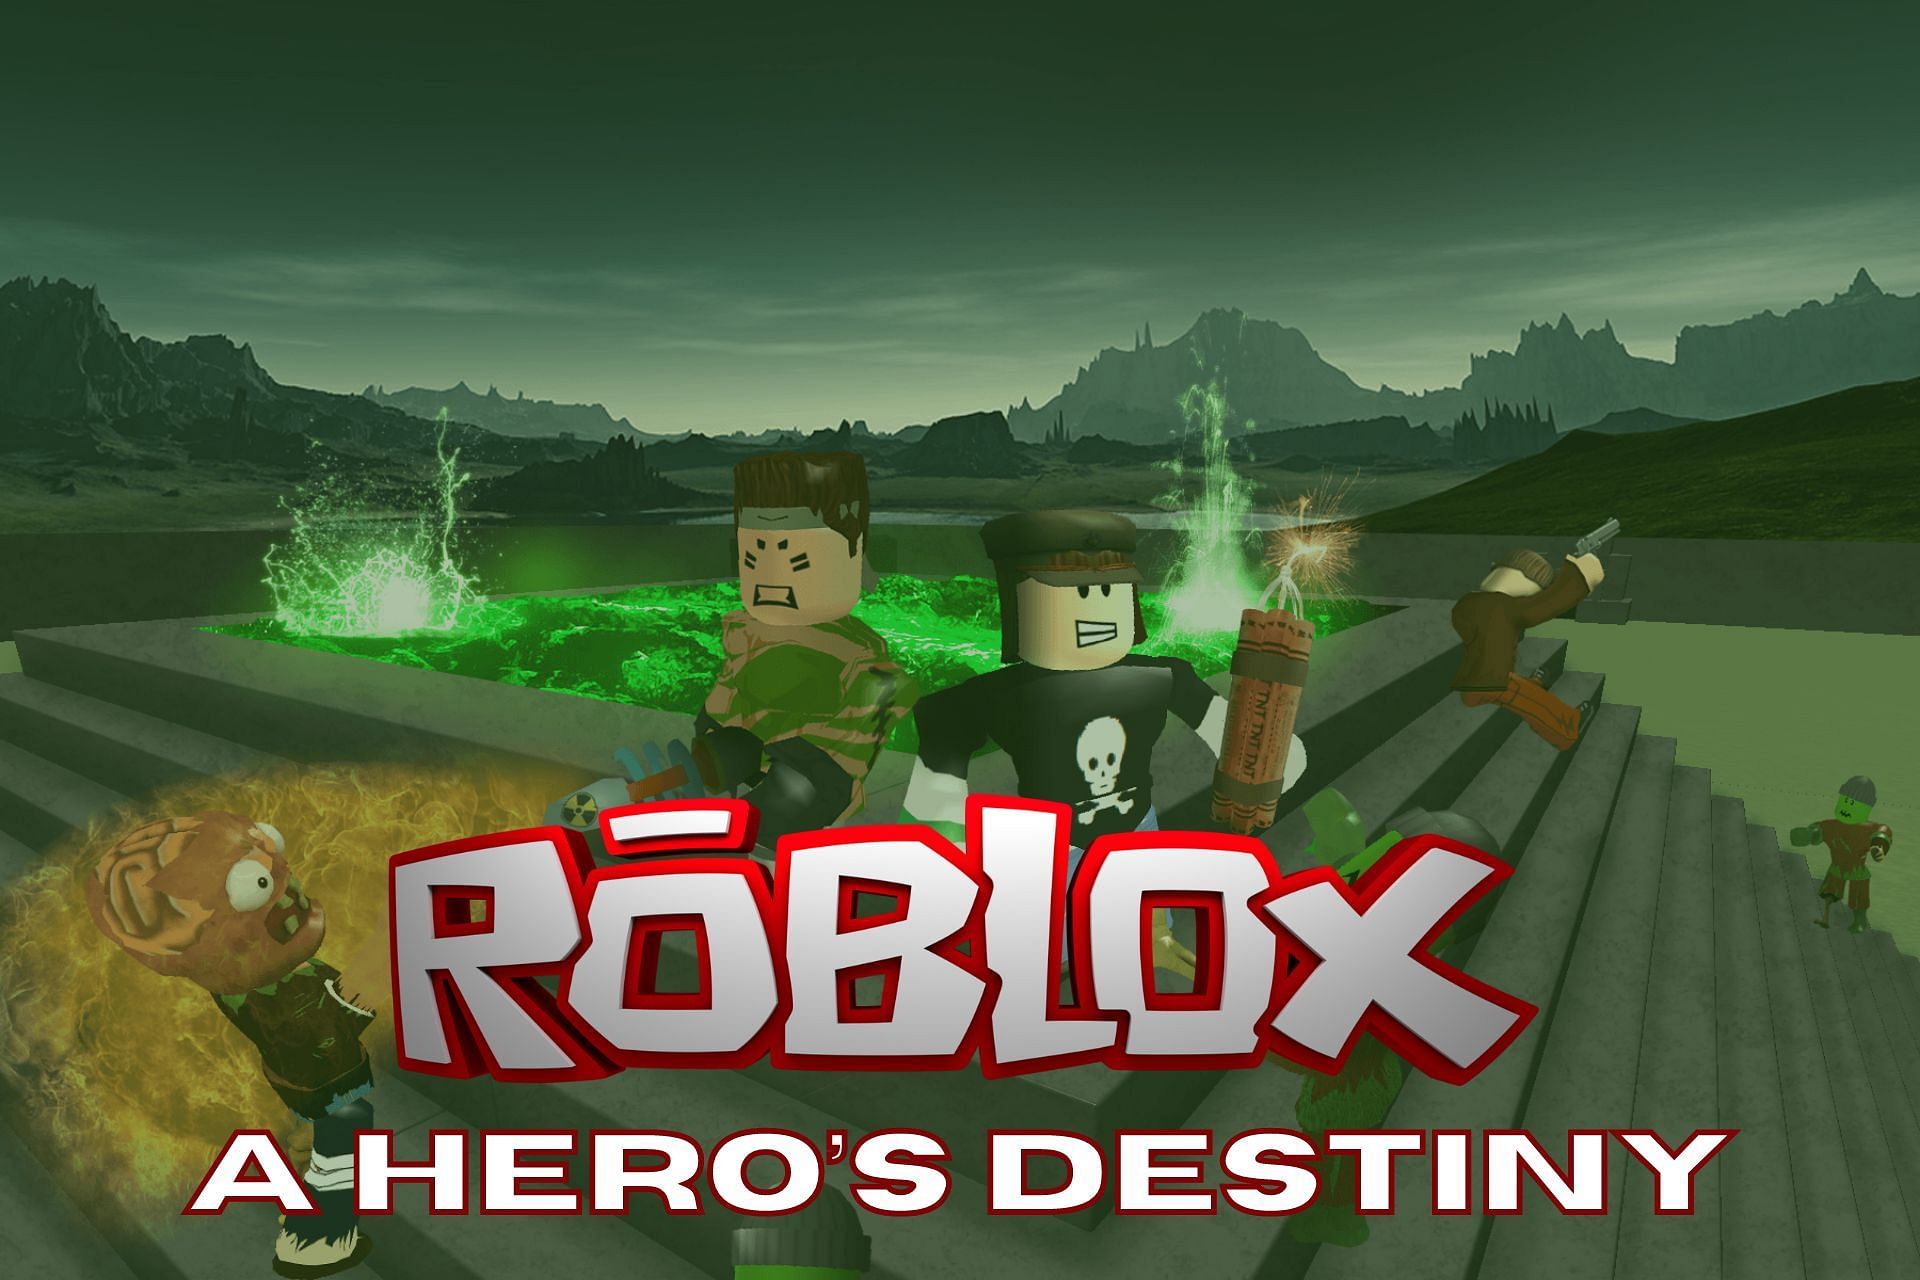 Roblox A Hero's Destiny codes in November 2022: Free spins, boosts, and more